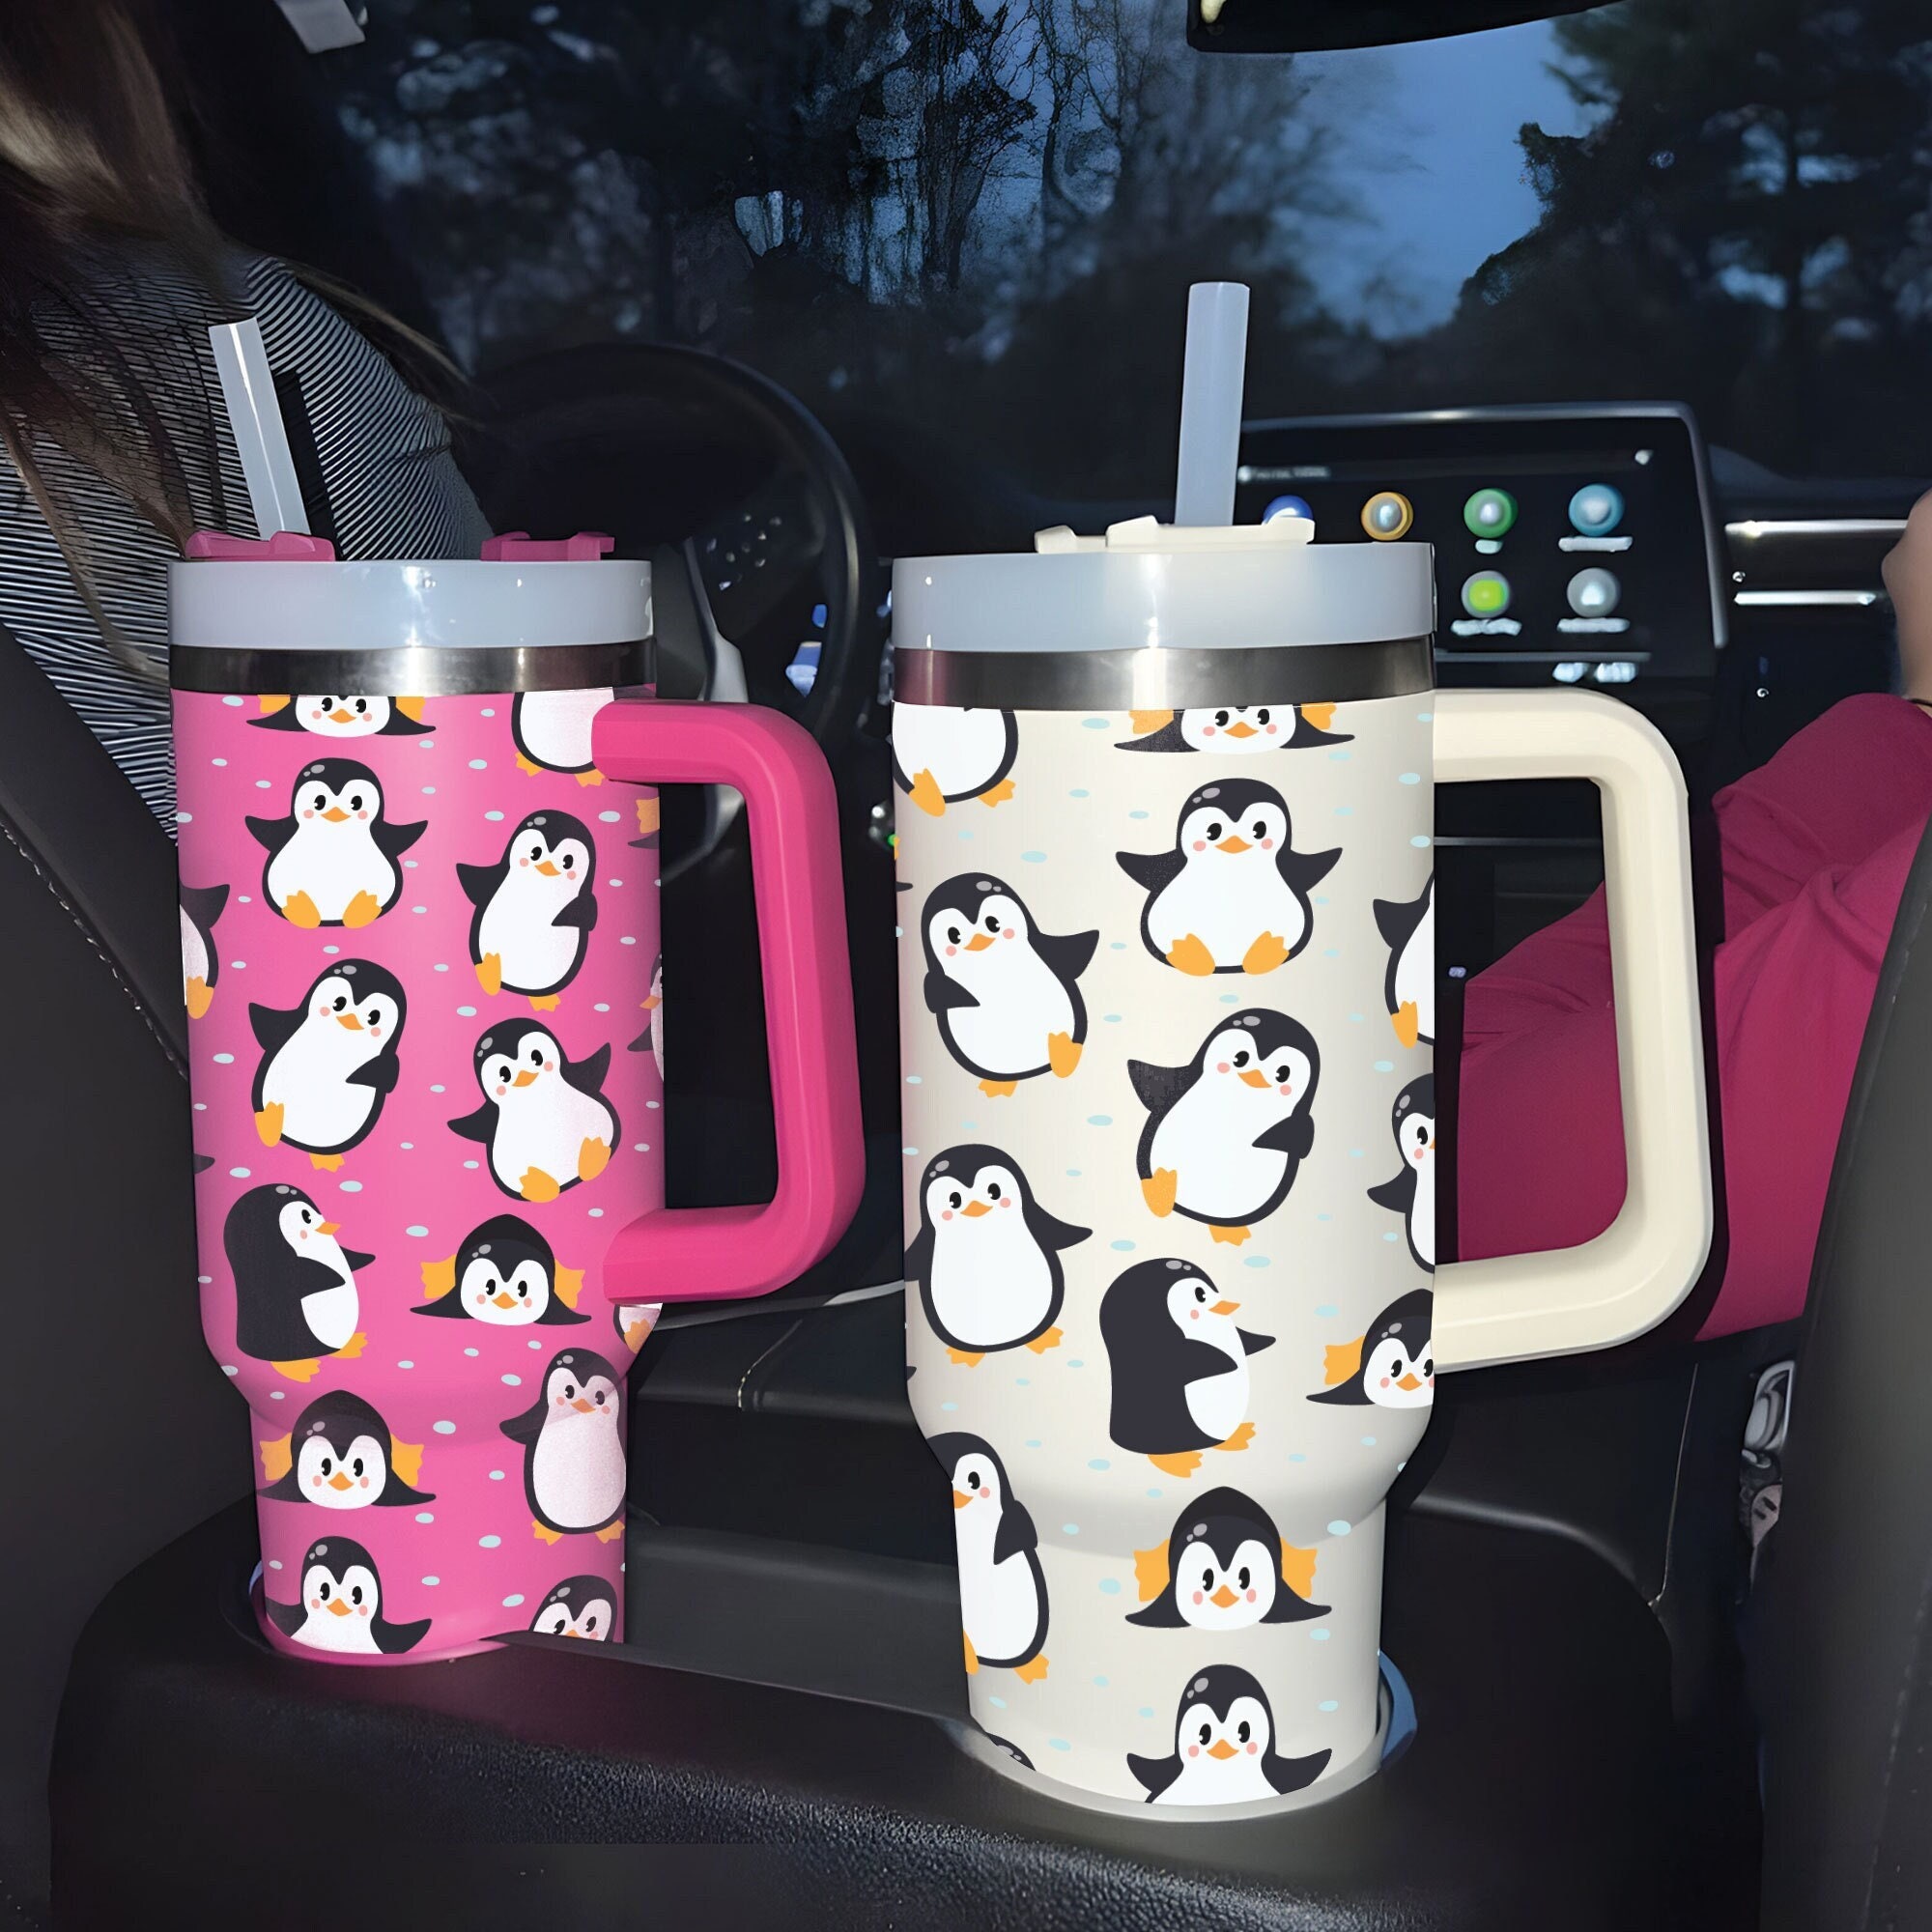 These Super Cute Stanley Tumbler Accessories are Just $2 on